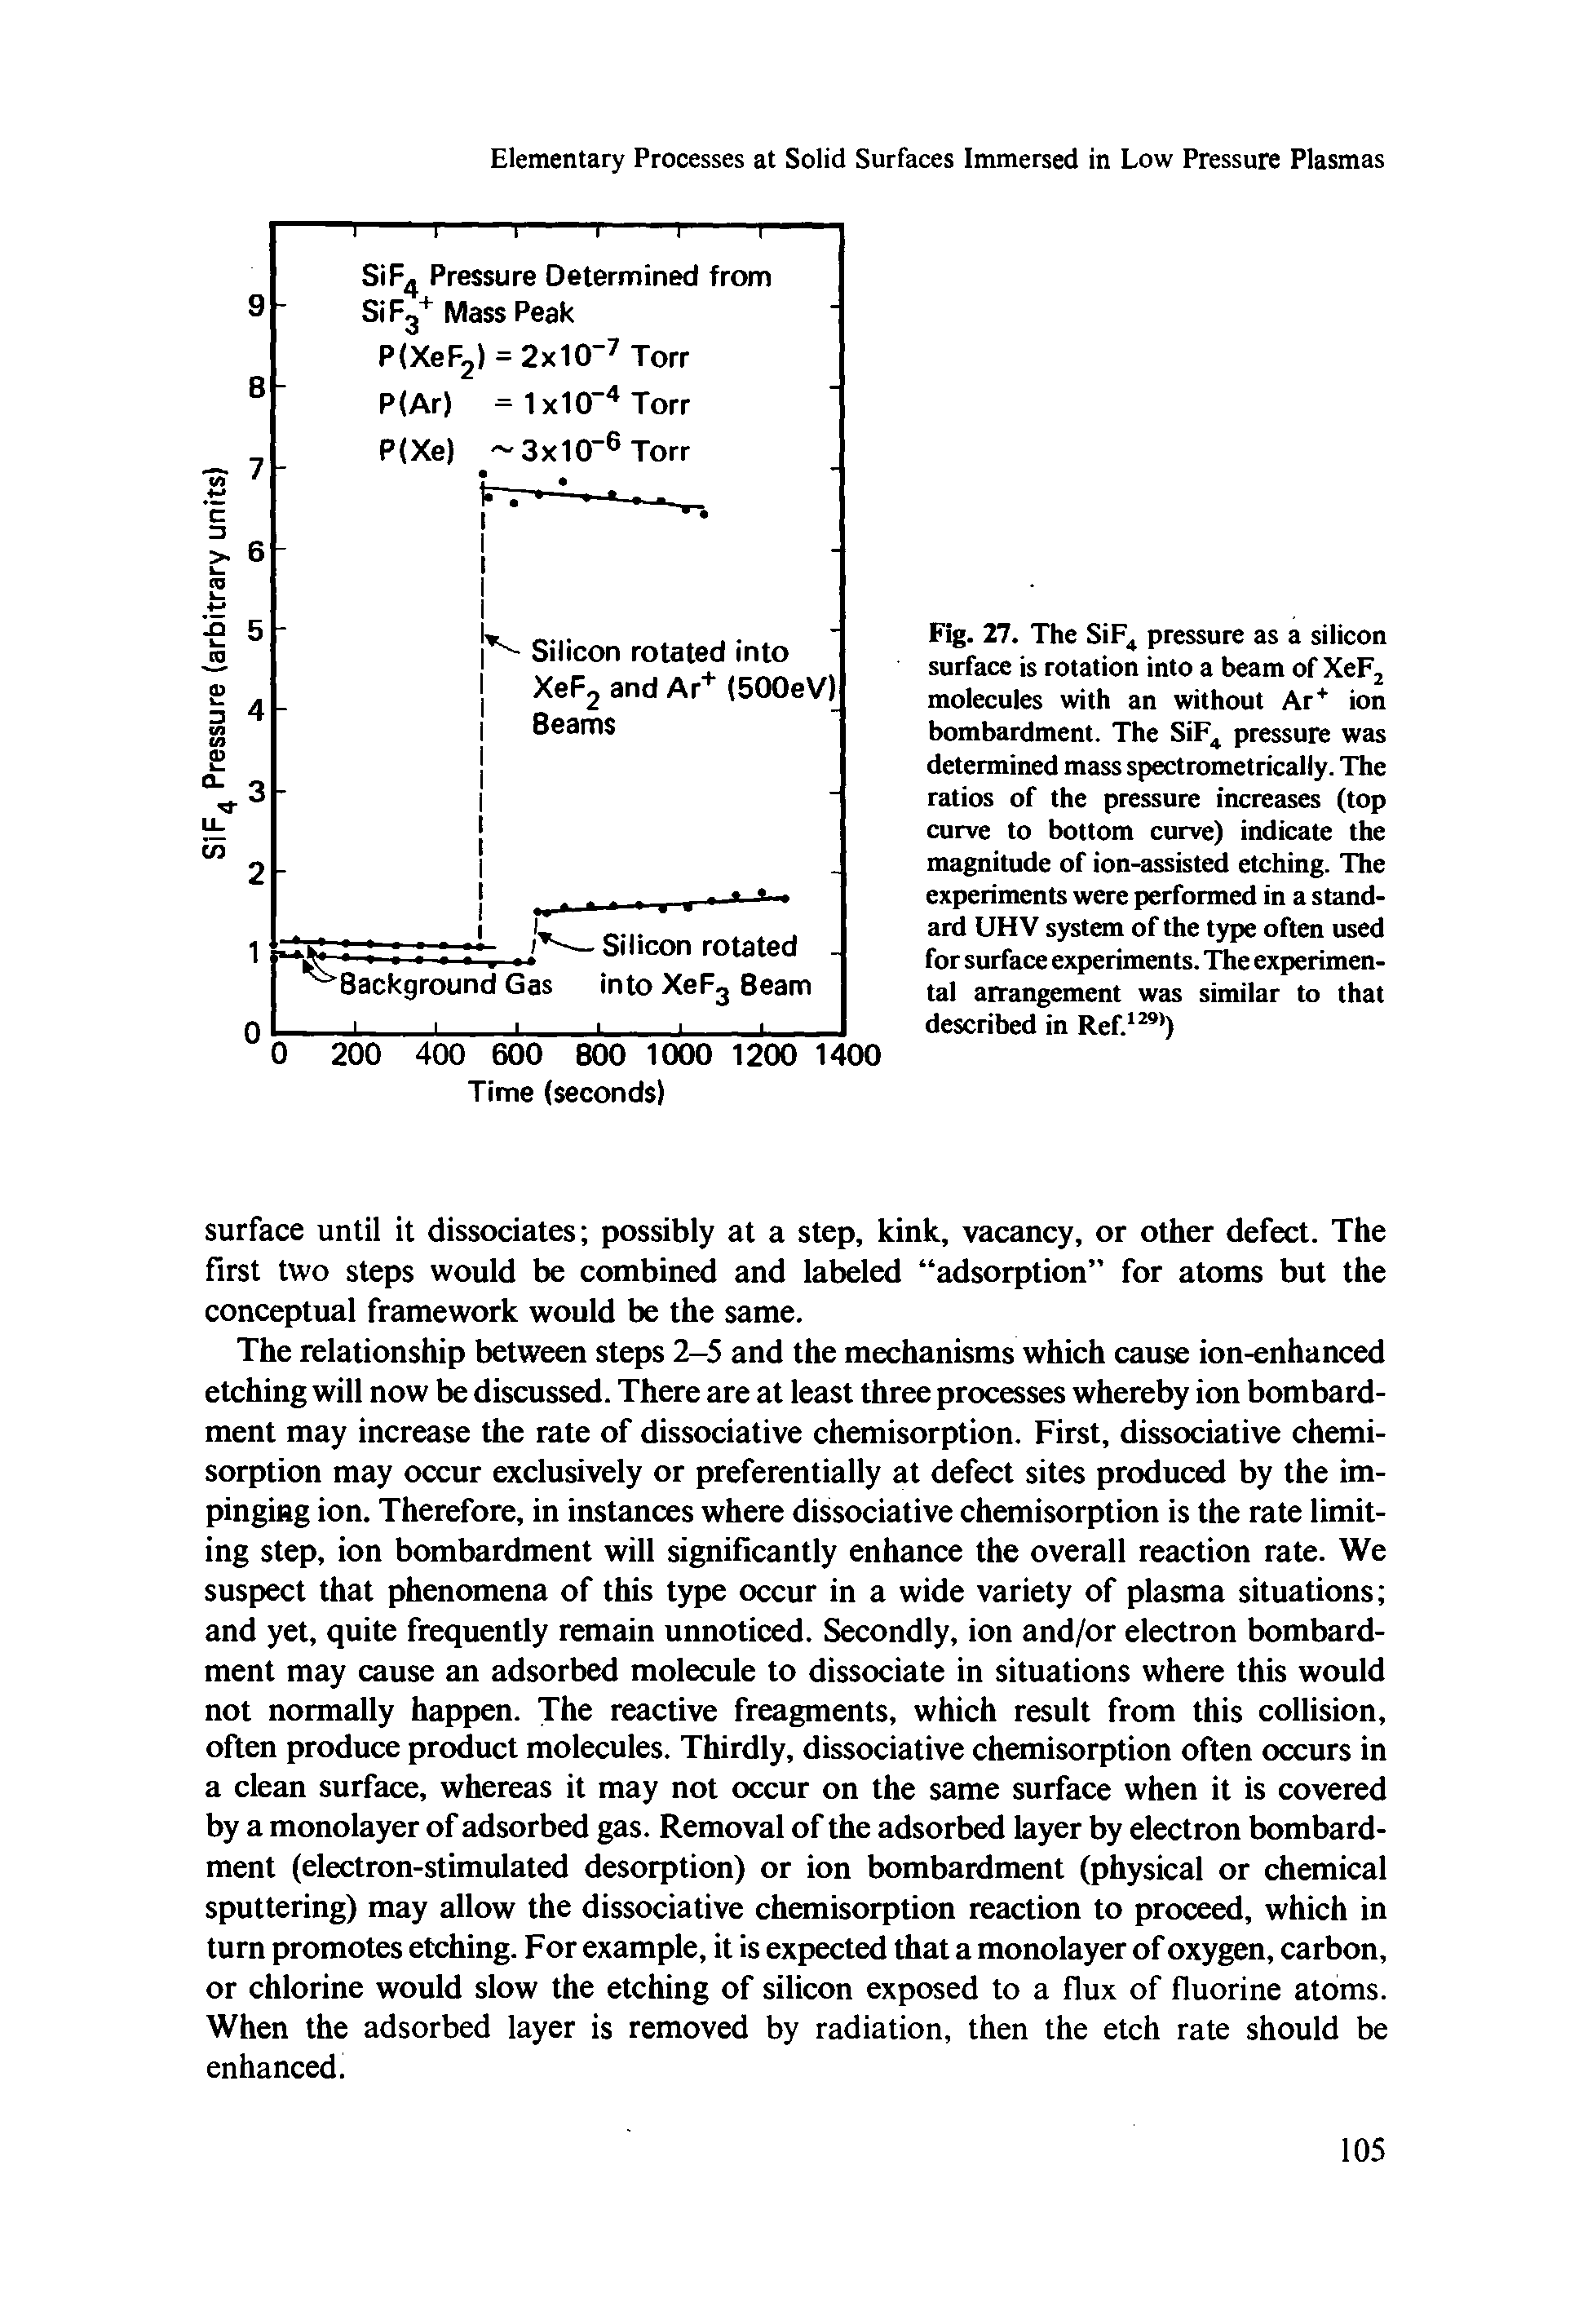 Fig. 27. The SiF pressure as a silicon surface is rotation into a beam of XeFj molecules with an without Ar ion bombardment. The SiF pressure was determined mass spectrometrically. The ratios of the pressure increases (top curve to bottom curve) indicate the magnitude of ion-assisted etching. The experiments were performed in a standard UHV system of the type often used for surface experiments. The experimental arrangement was similar to that described in Ref. )...